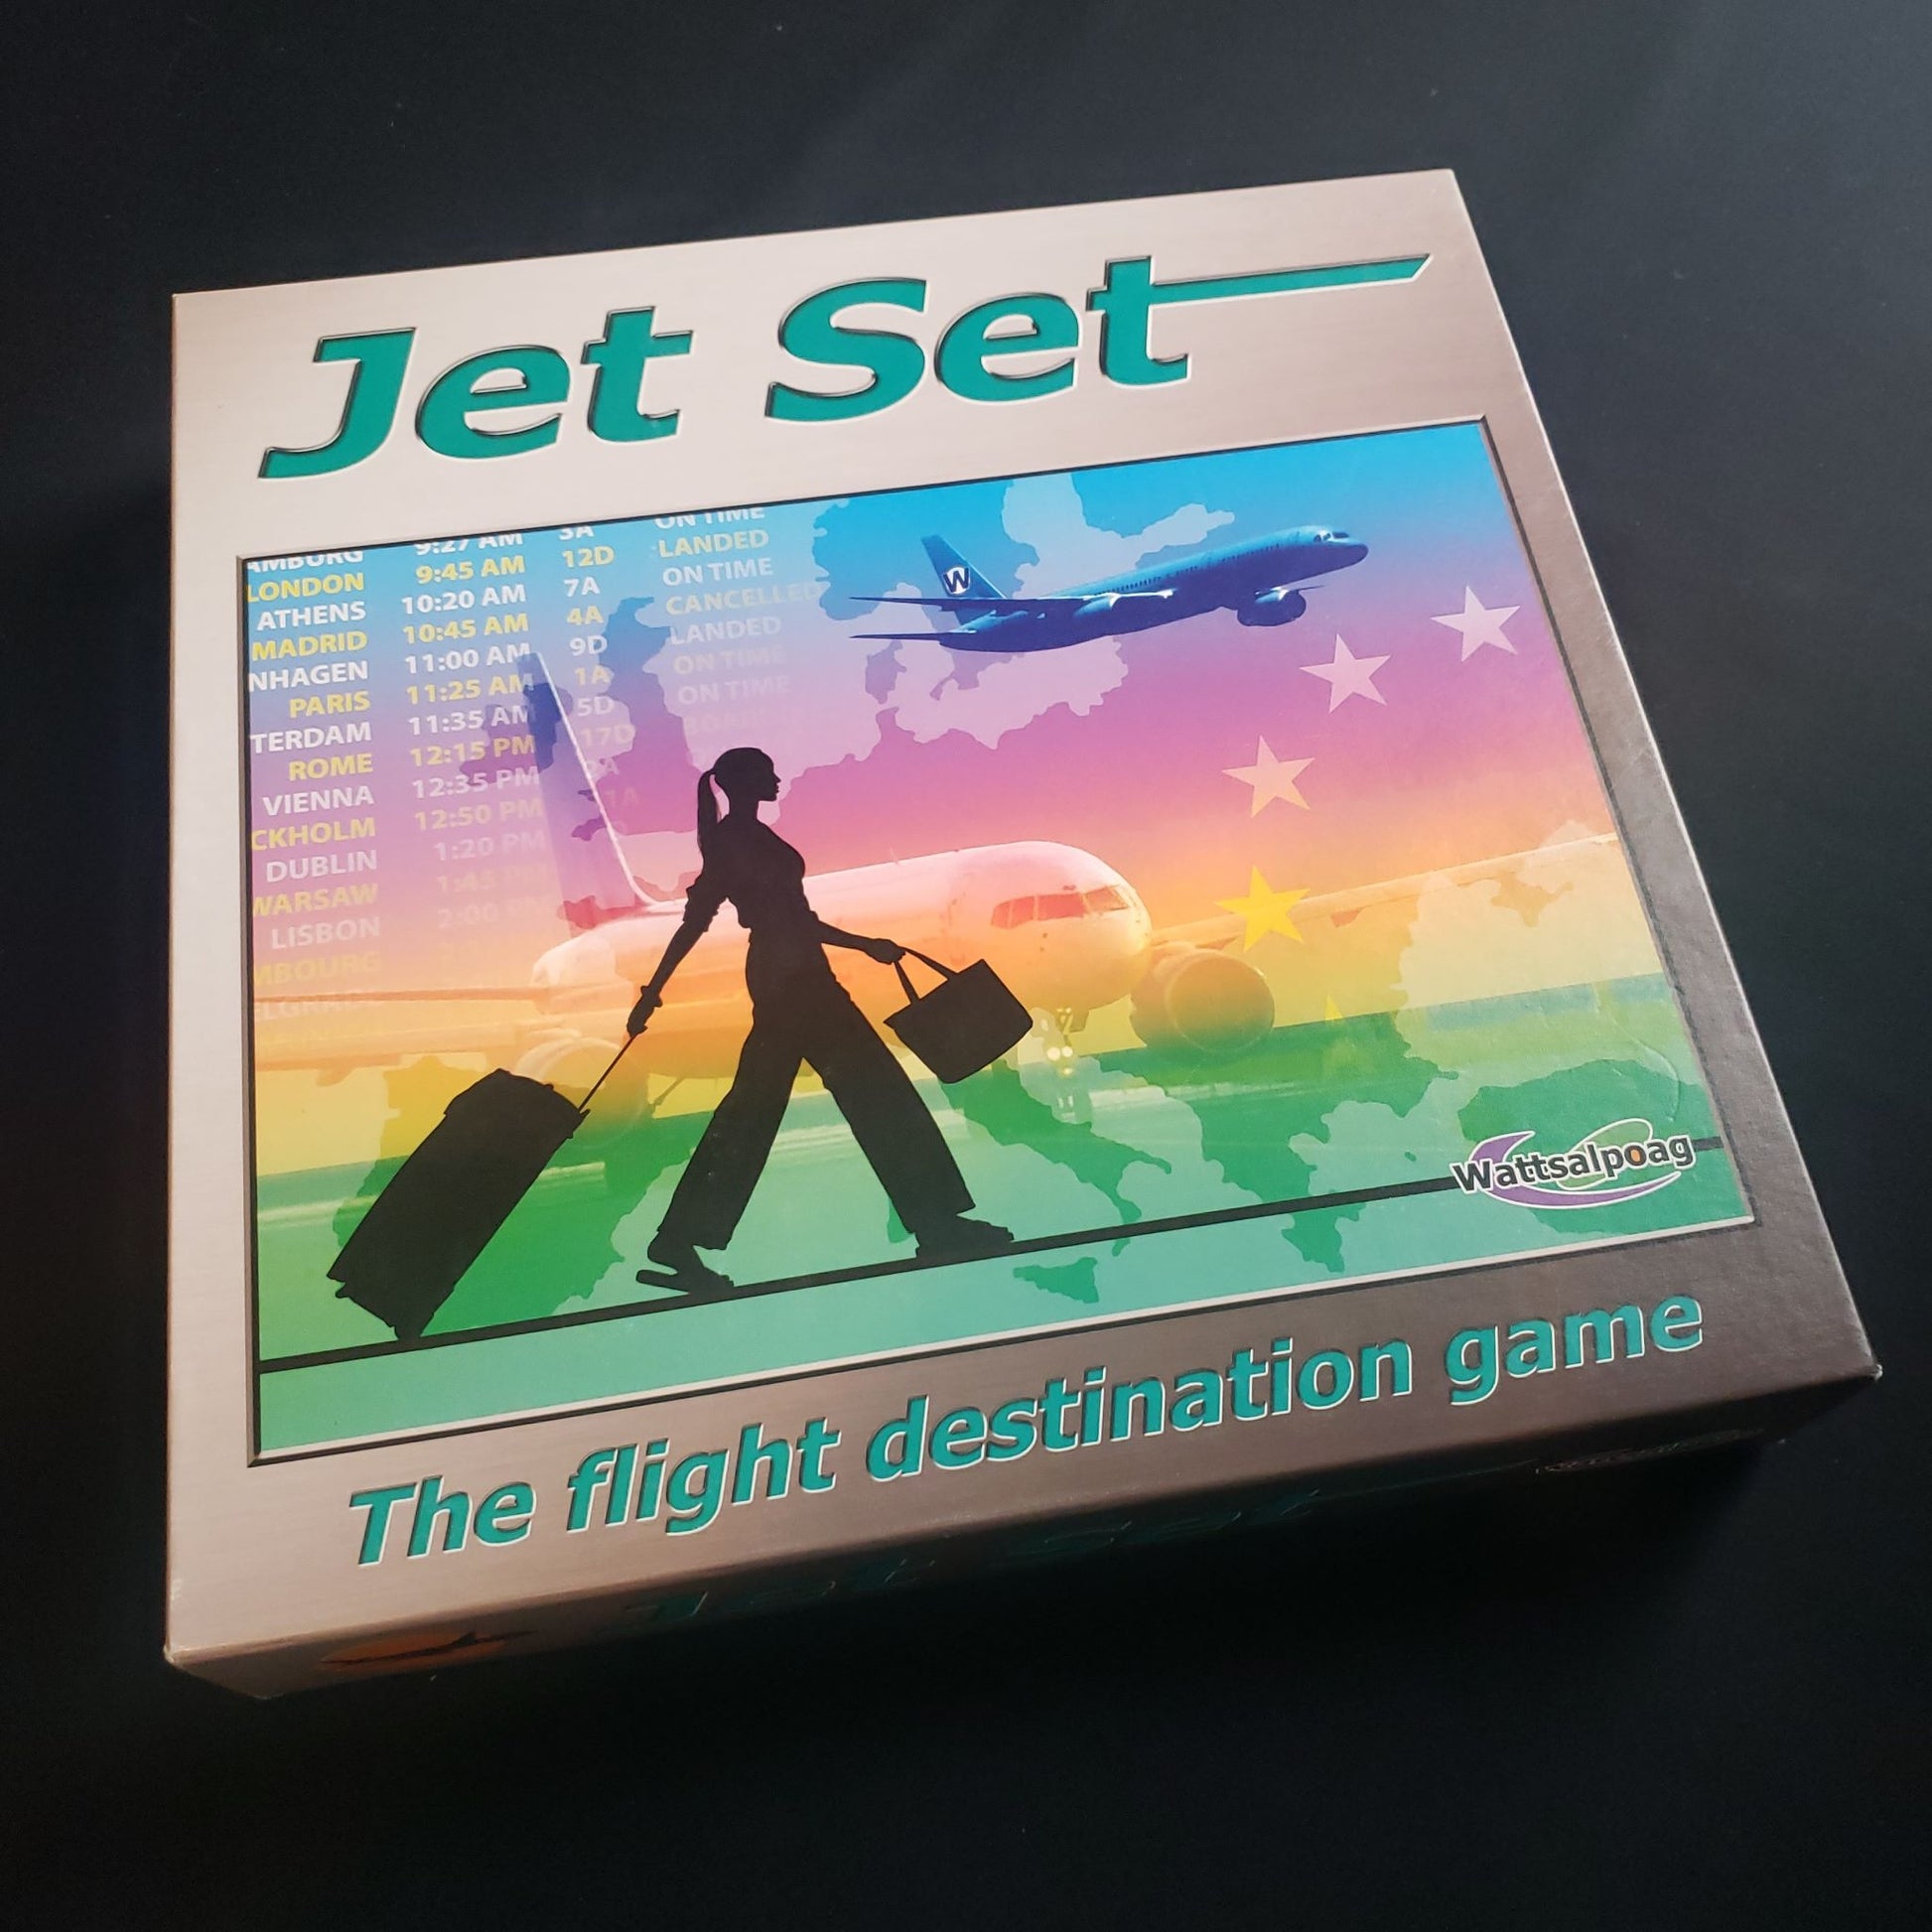 Image shows the front cover of the box of the Jet Set board game